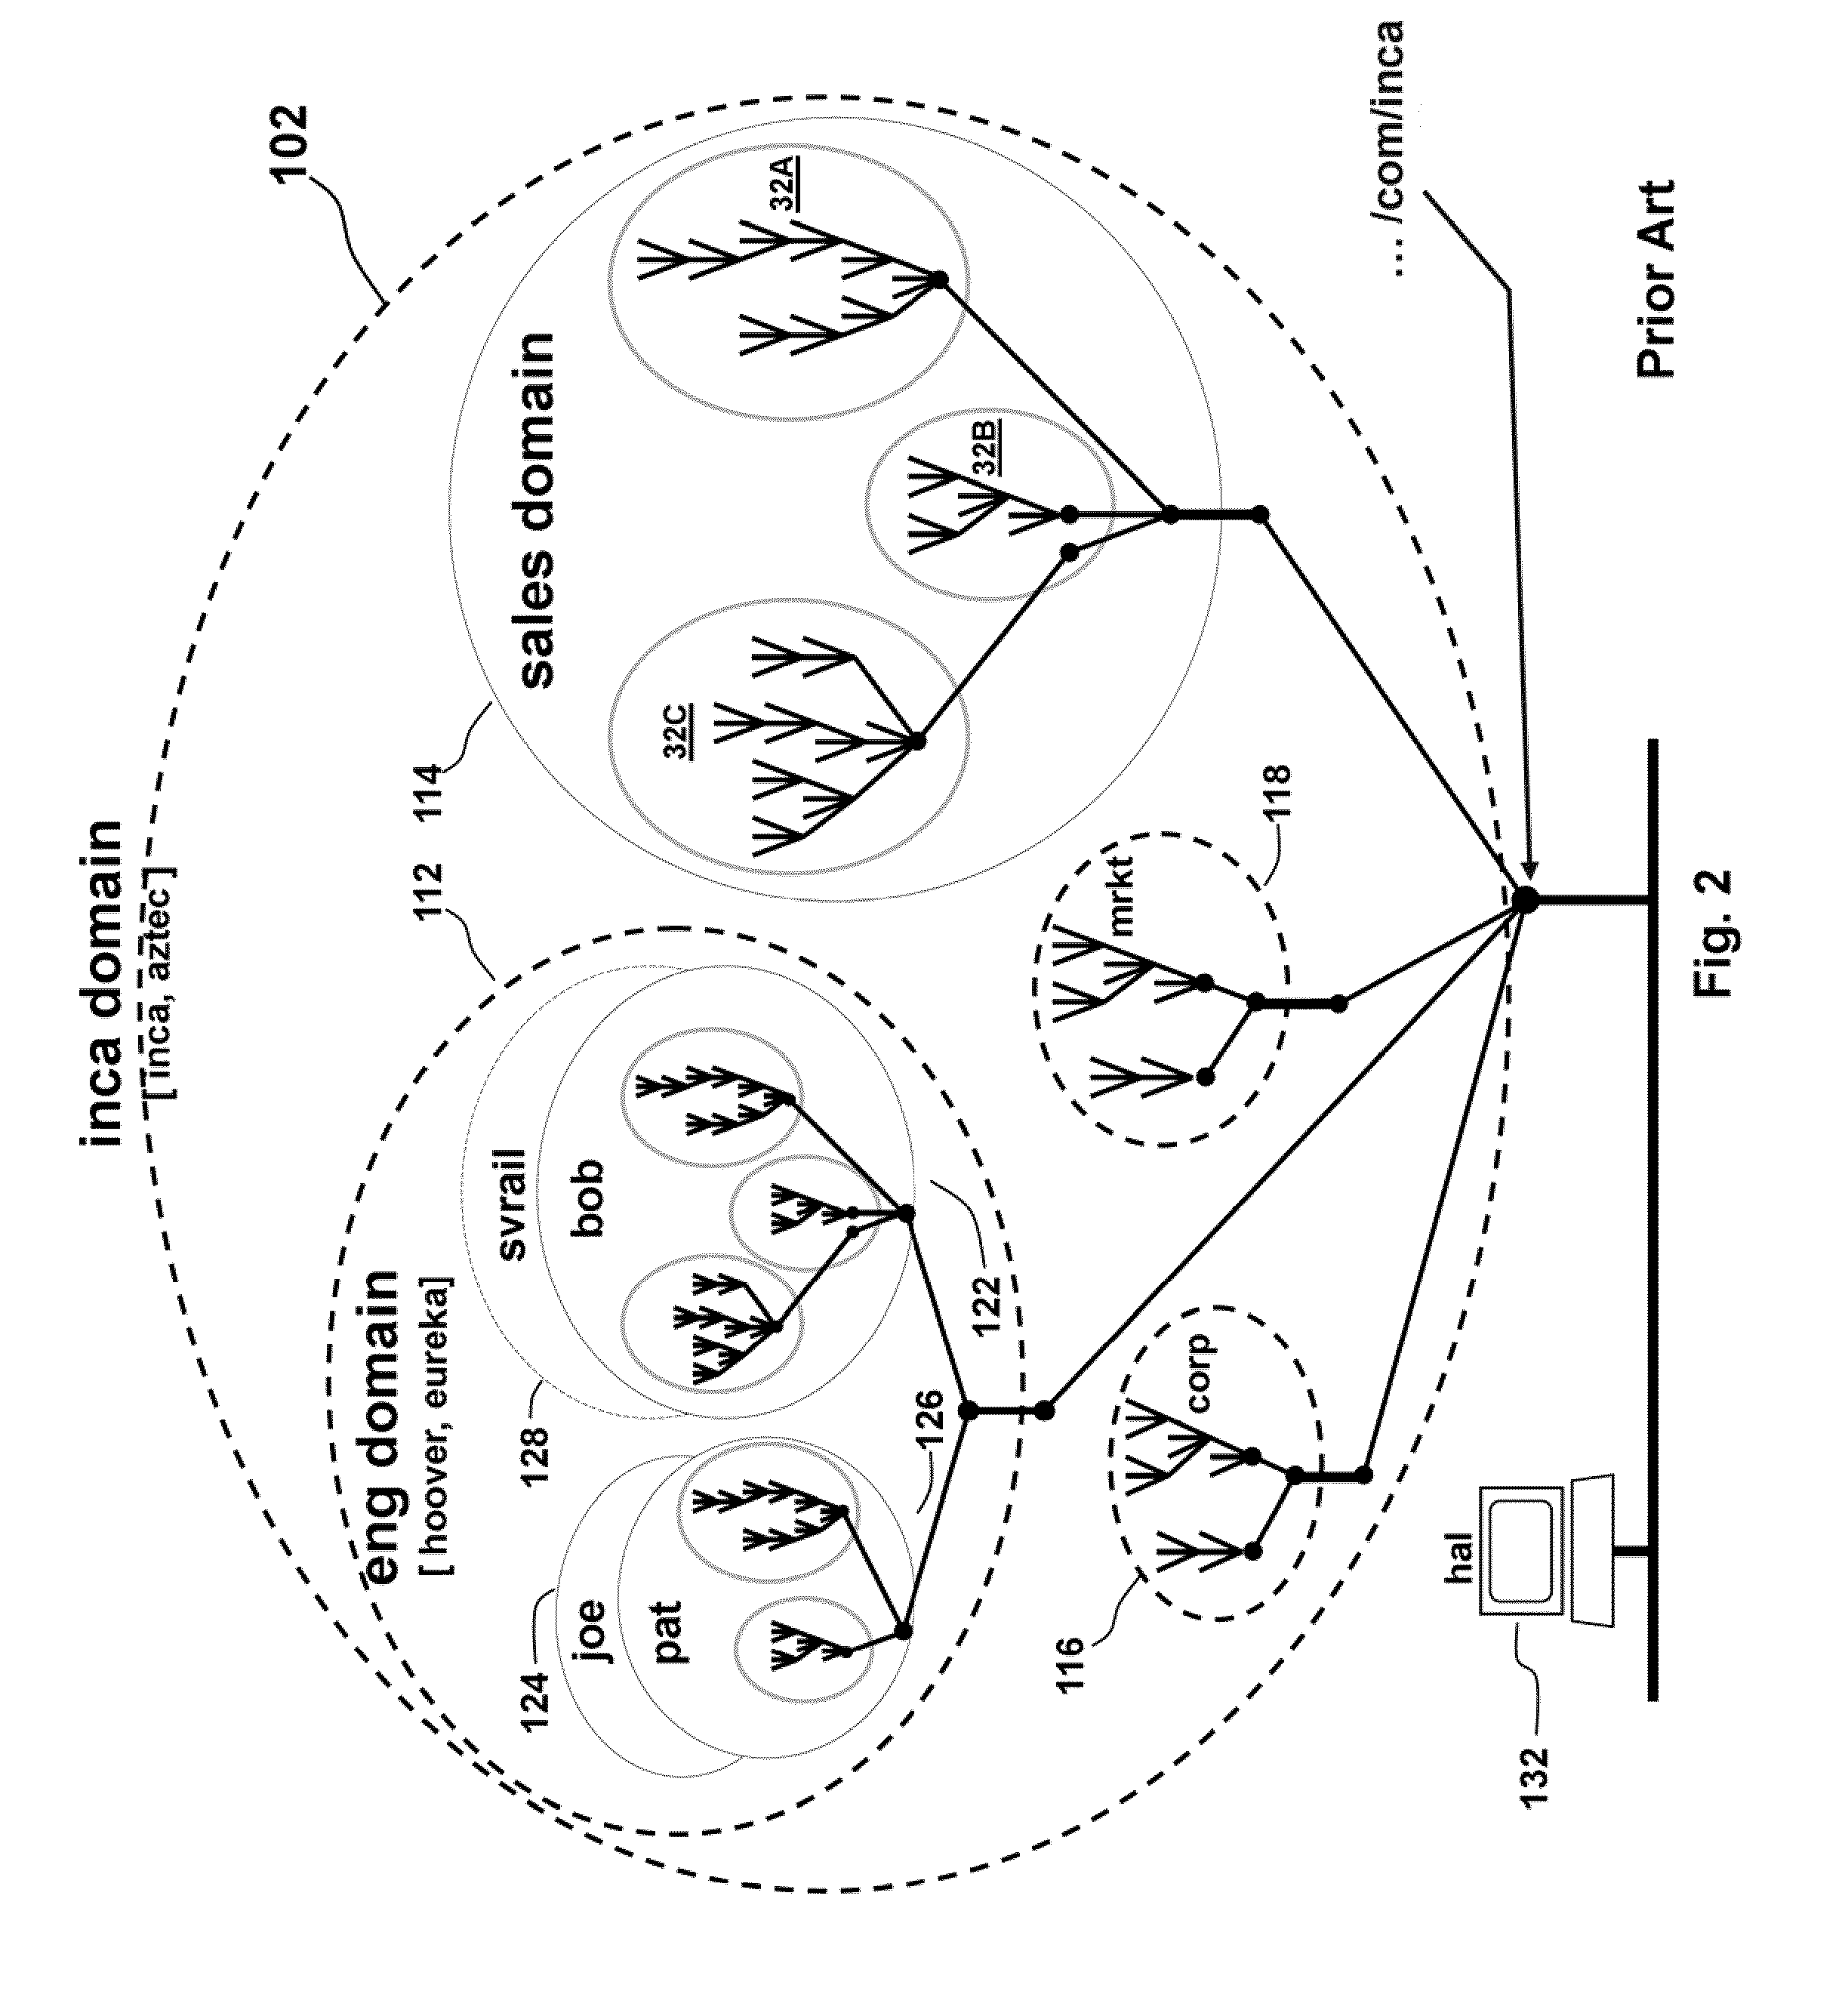 Distributed File System Consistency Mechanism Extension For Accelerating Communications Between Distributed Applications